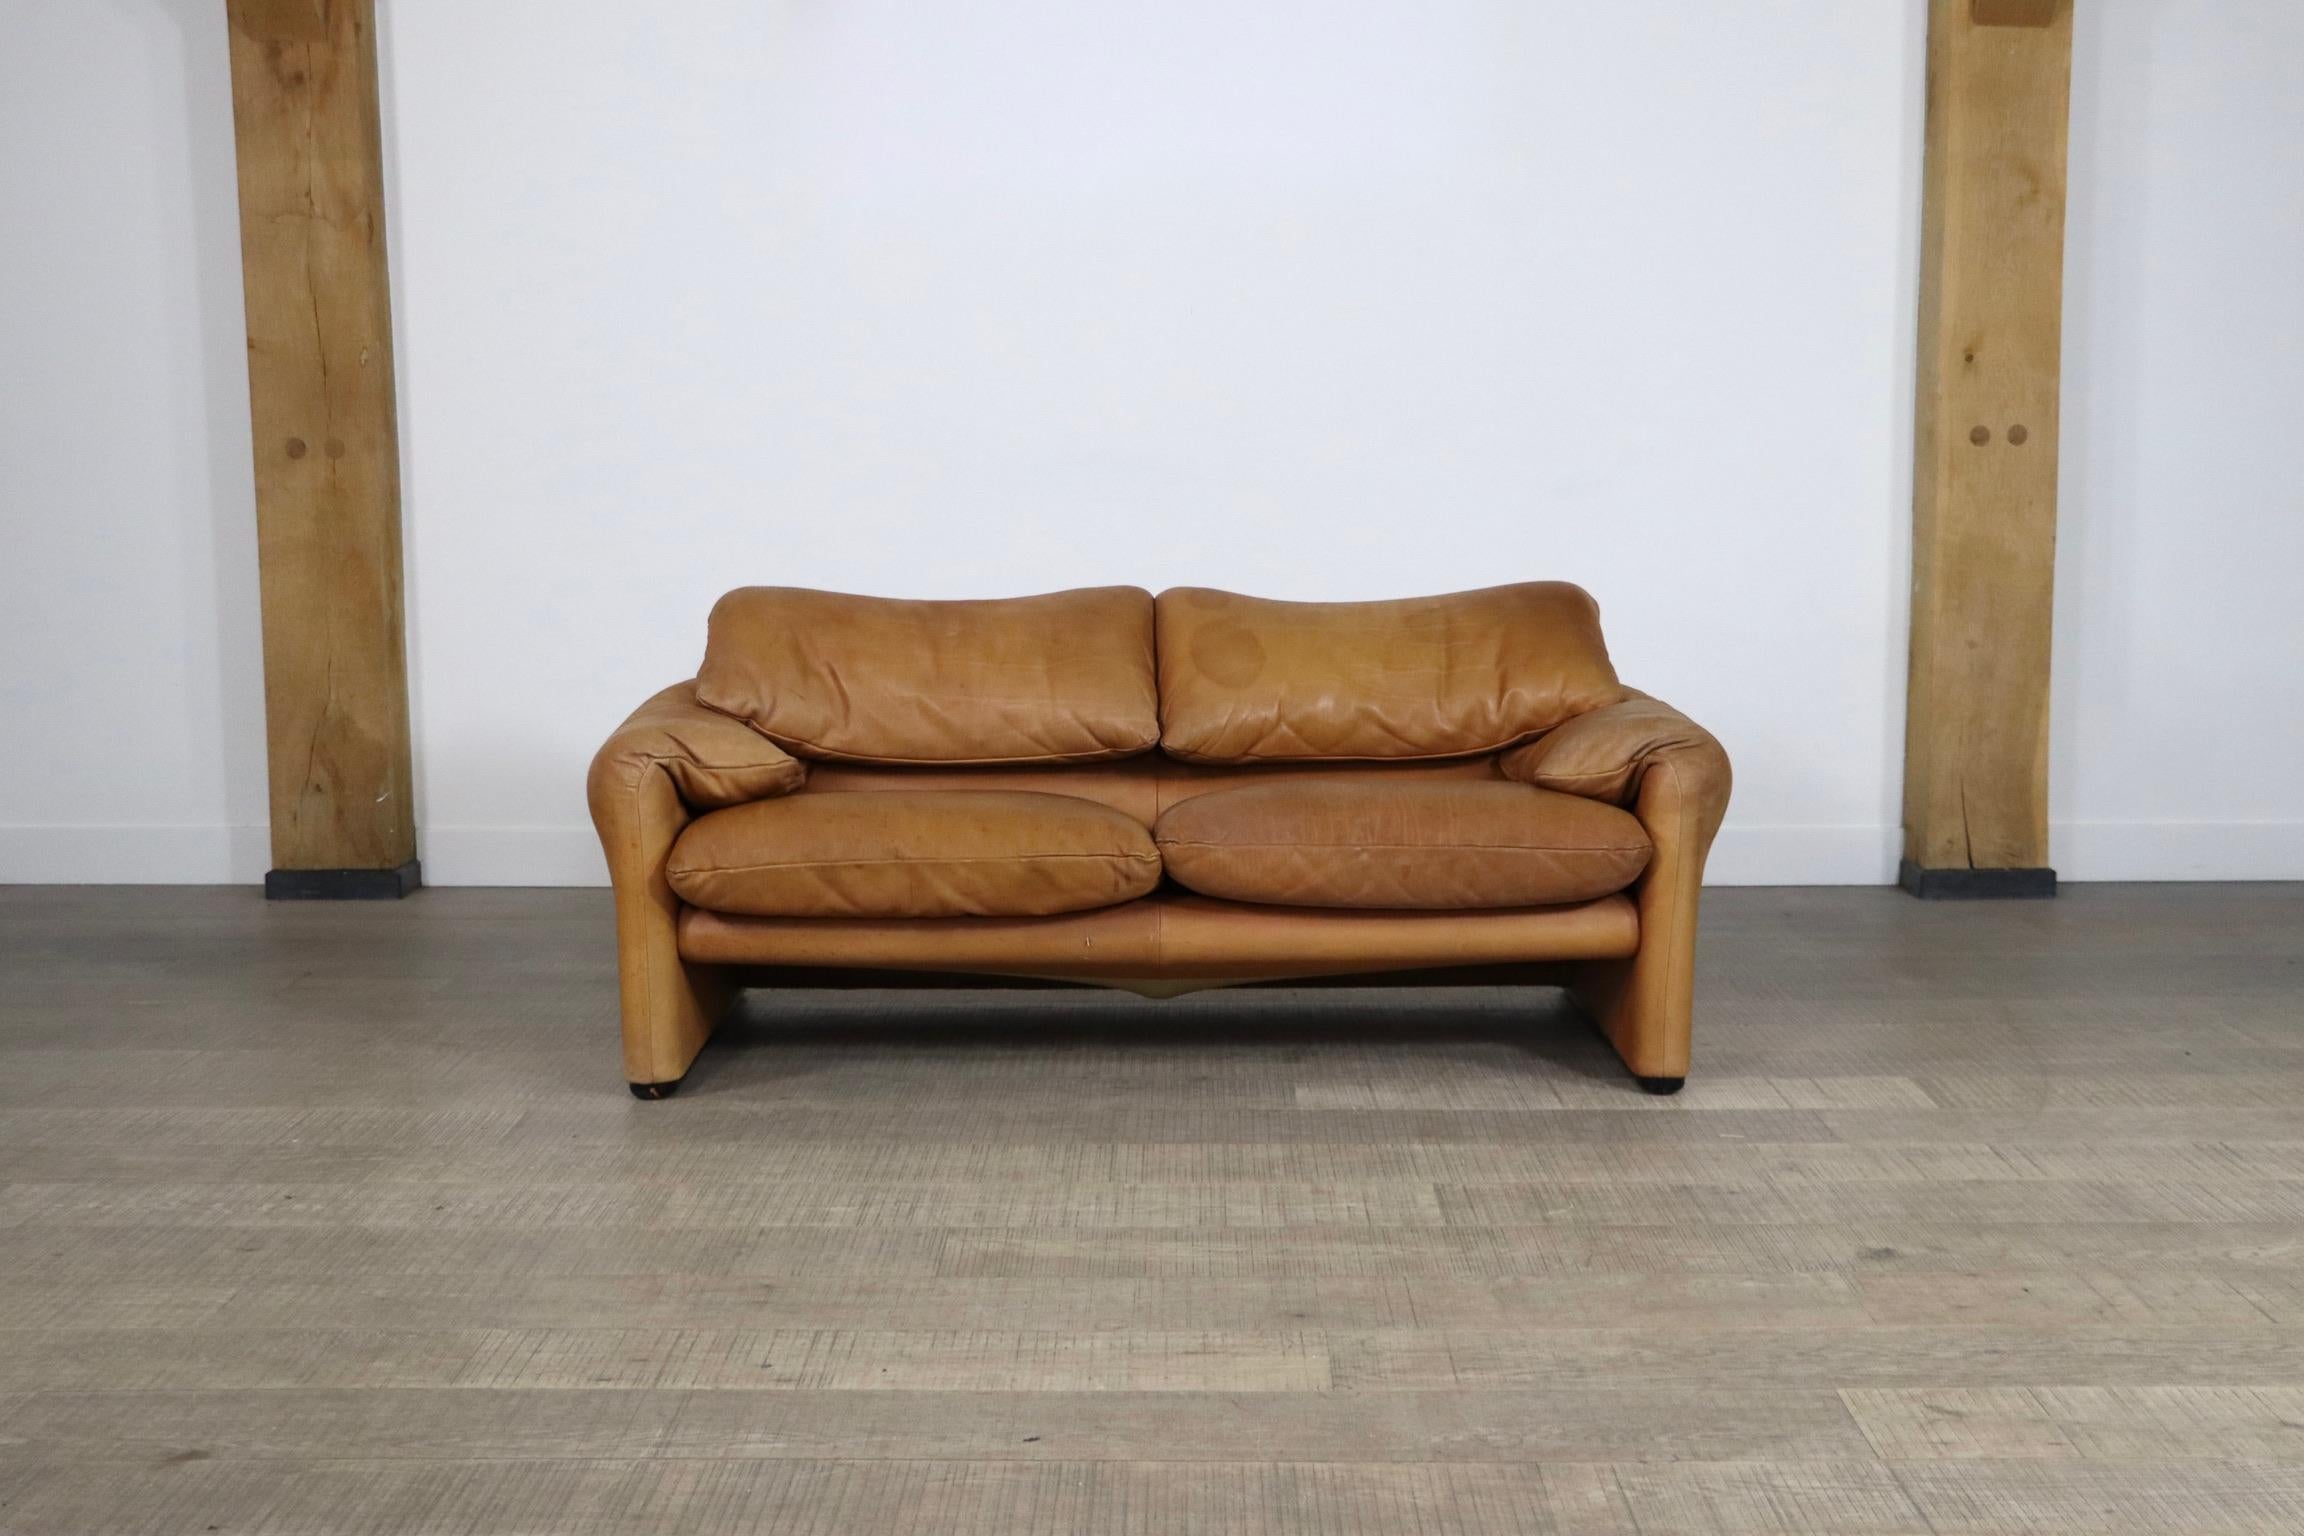 Stunning two seater Maralunga sofa, by Vico Magistretti for Cassina in the original cognac leather upholstery which has obtained a beautiful patina over the years.
This design is known for its high comfort and adjustable backrests. The vintage